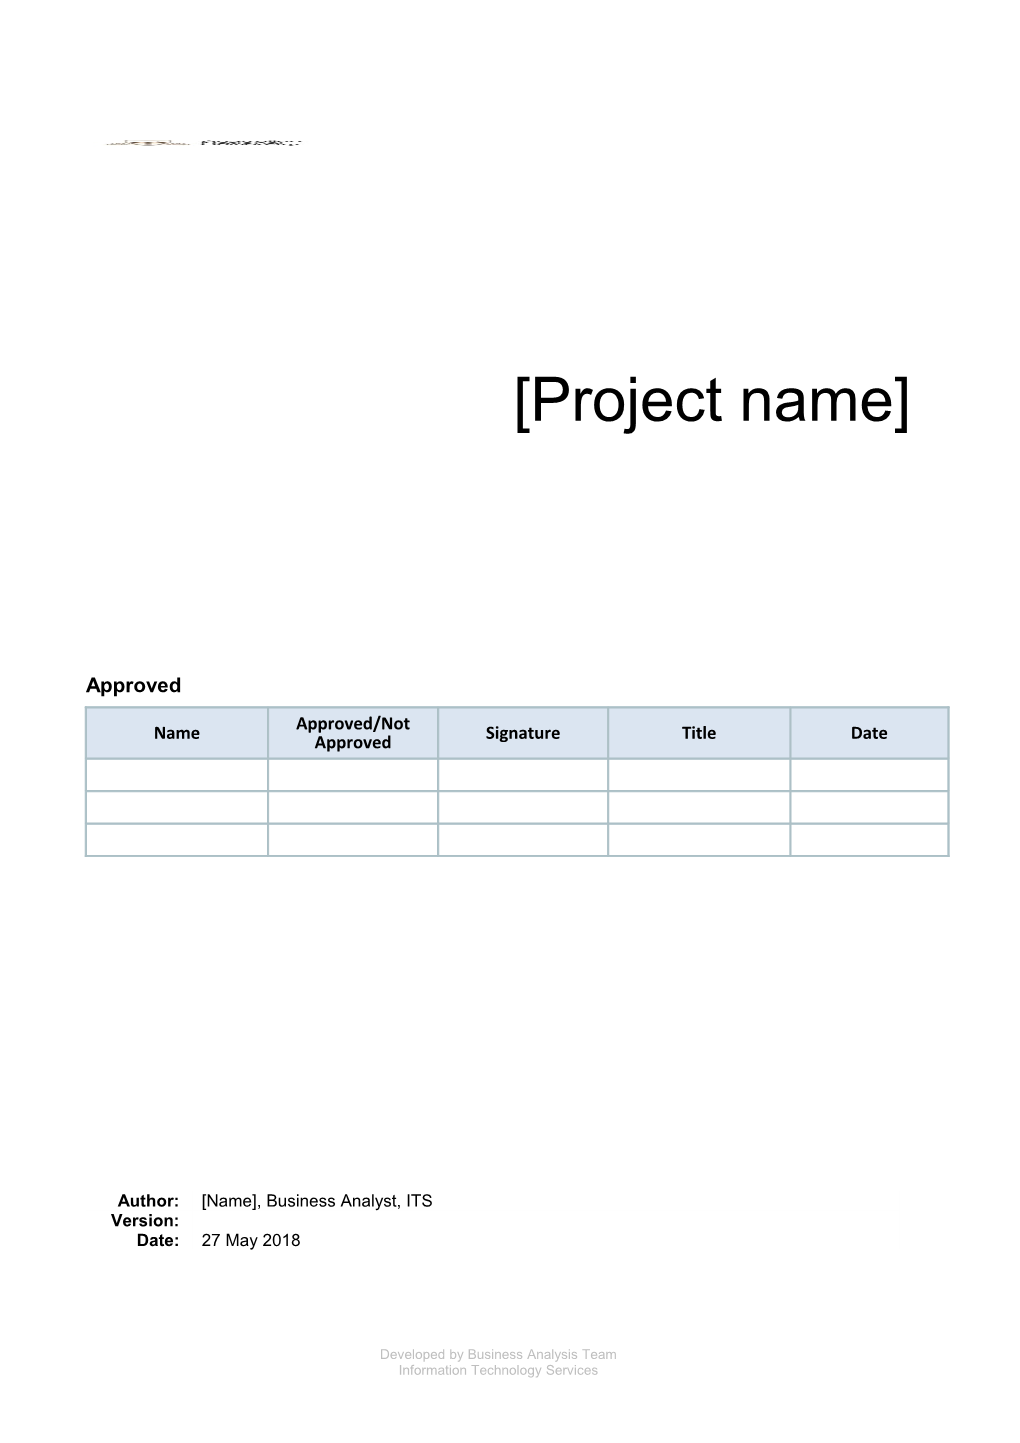 REQUIREMENTS MANAGEMENT PLAN Project Name